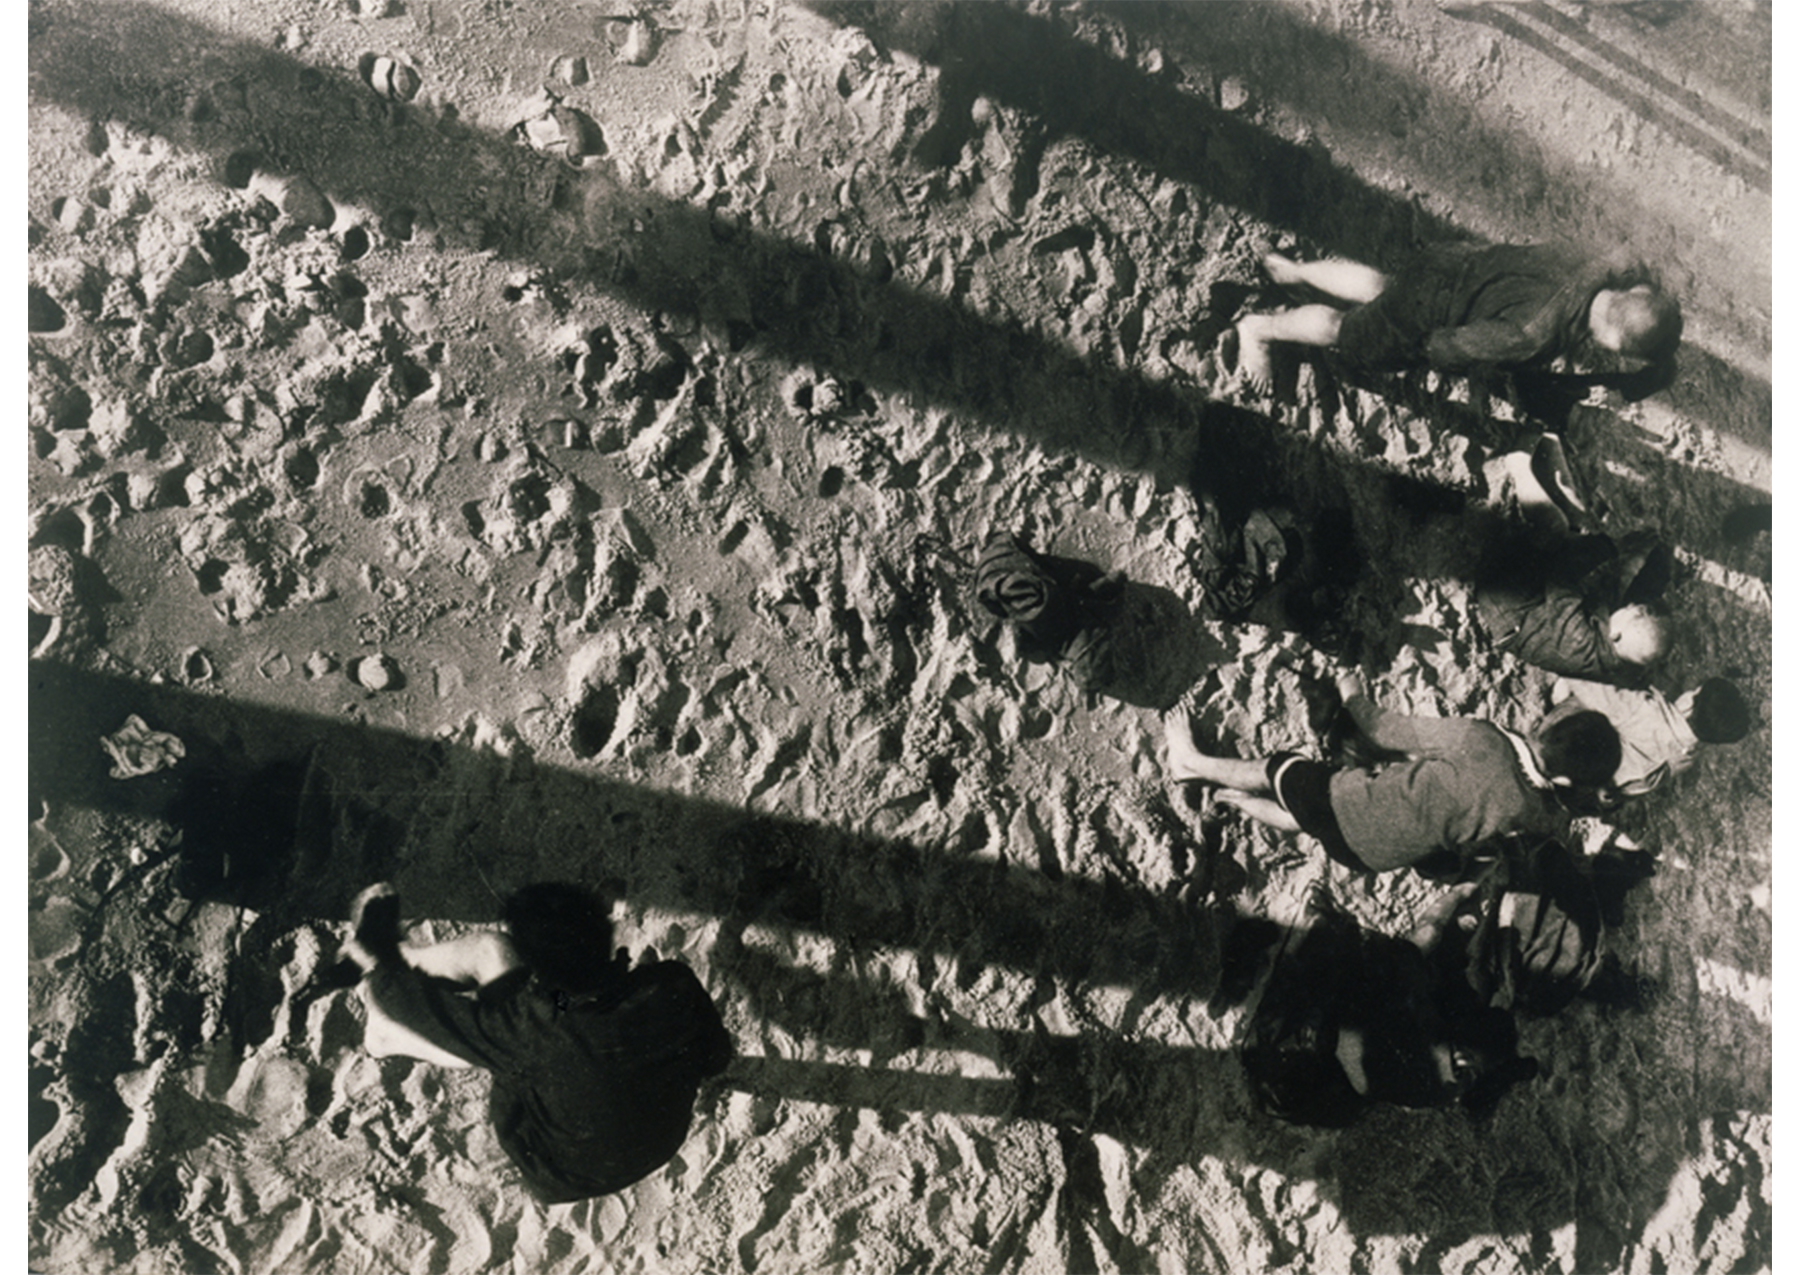 aerial view of children playing in sand, with heavy shadows over the image